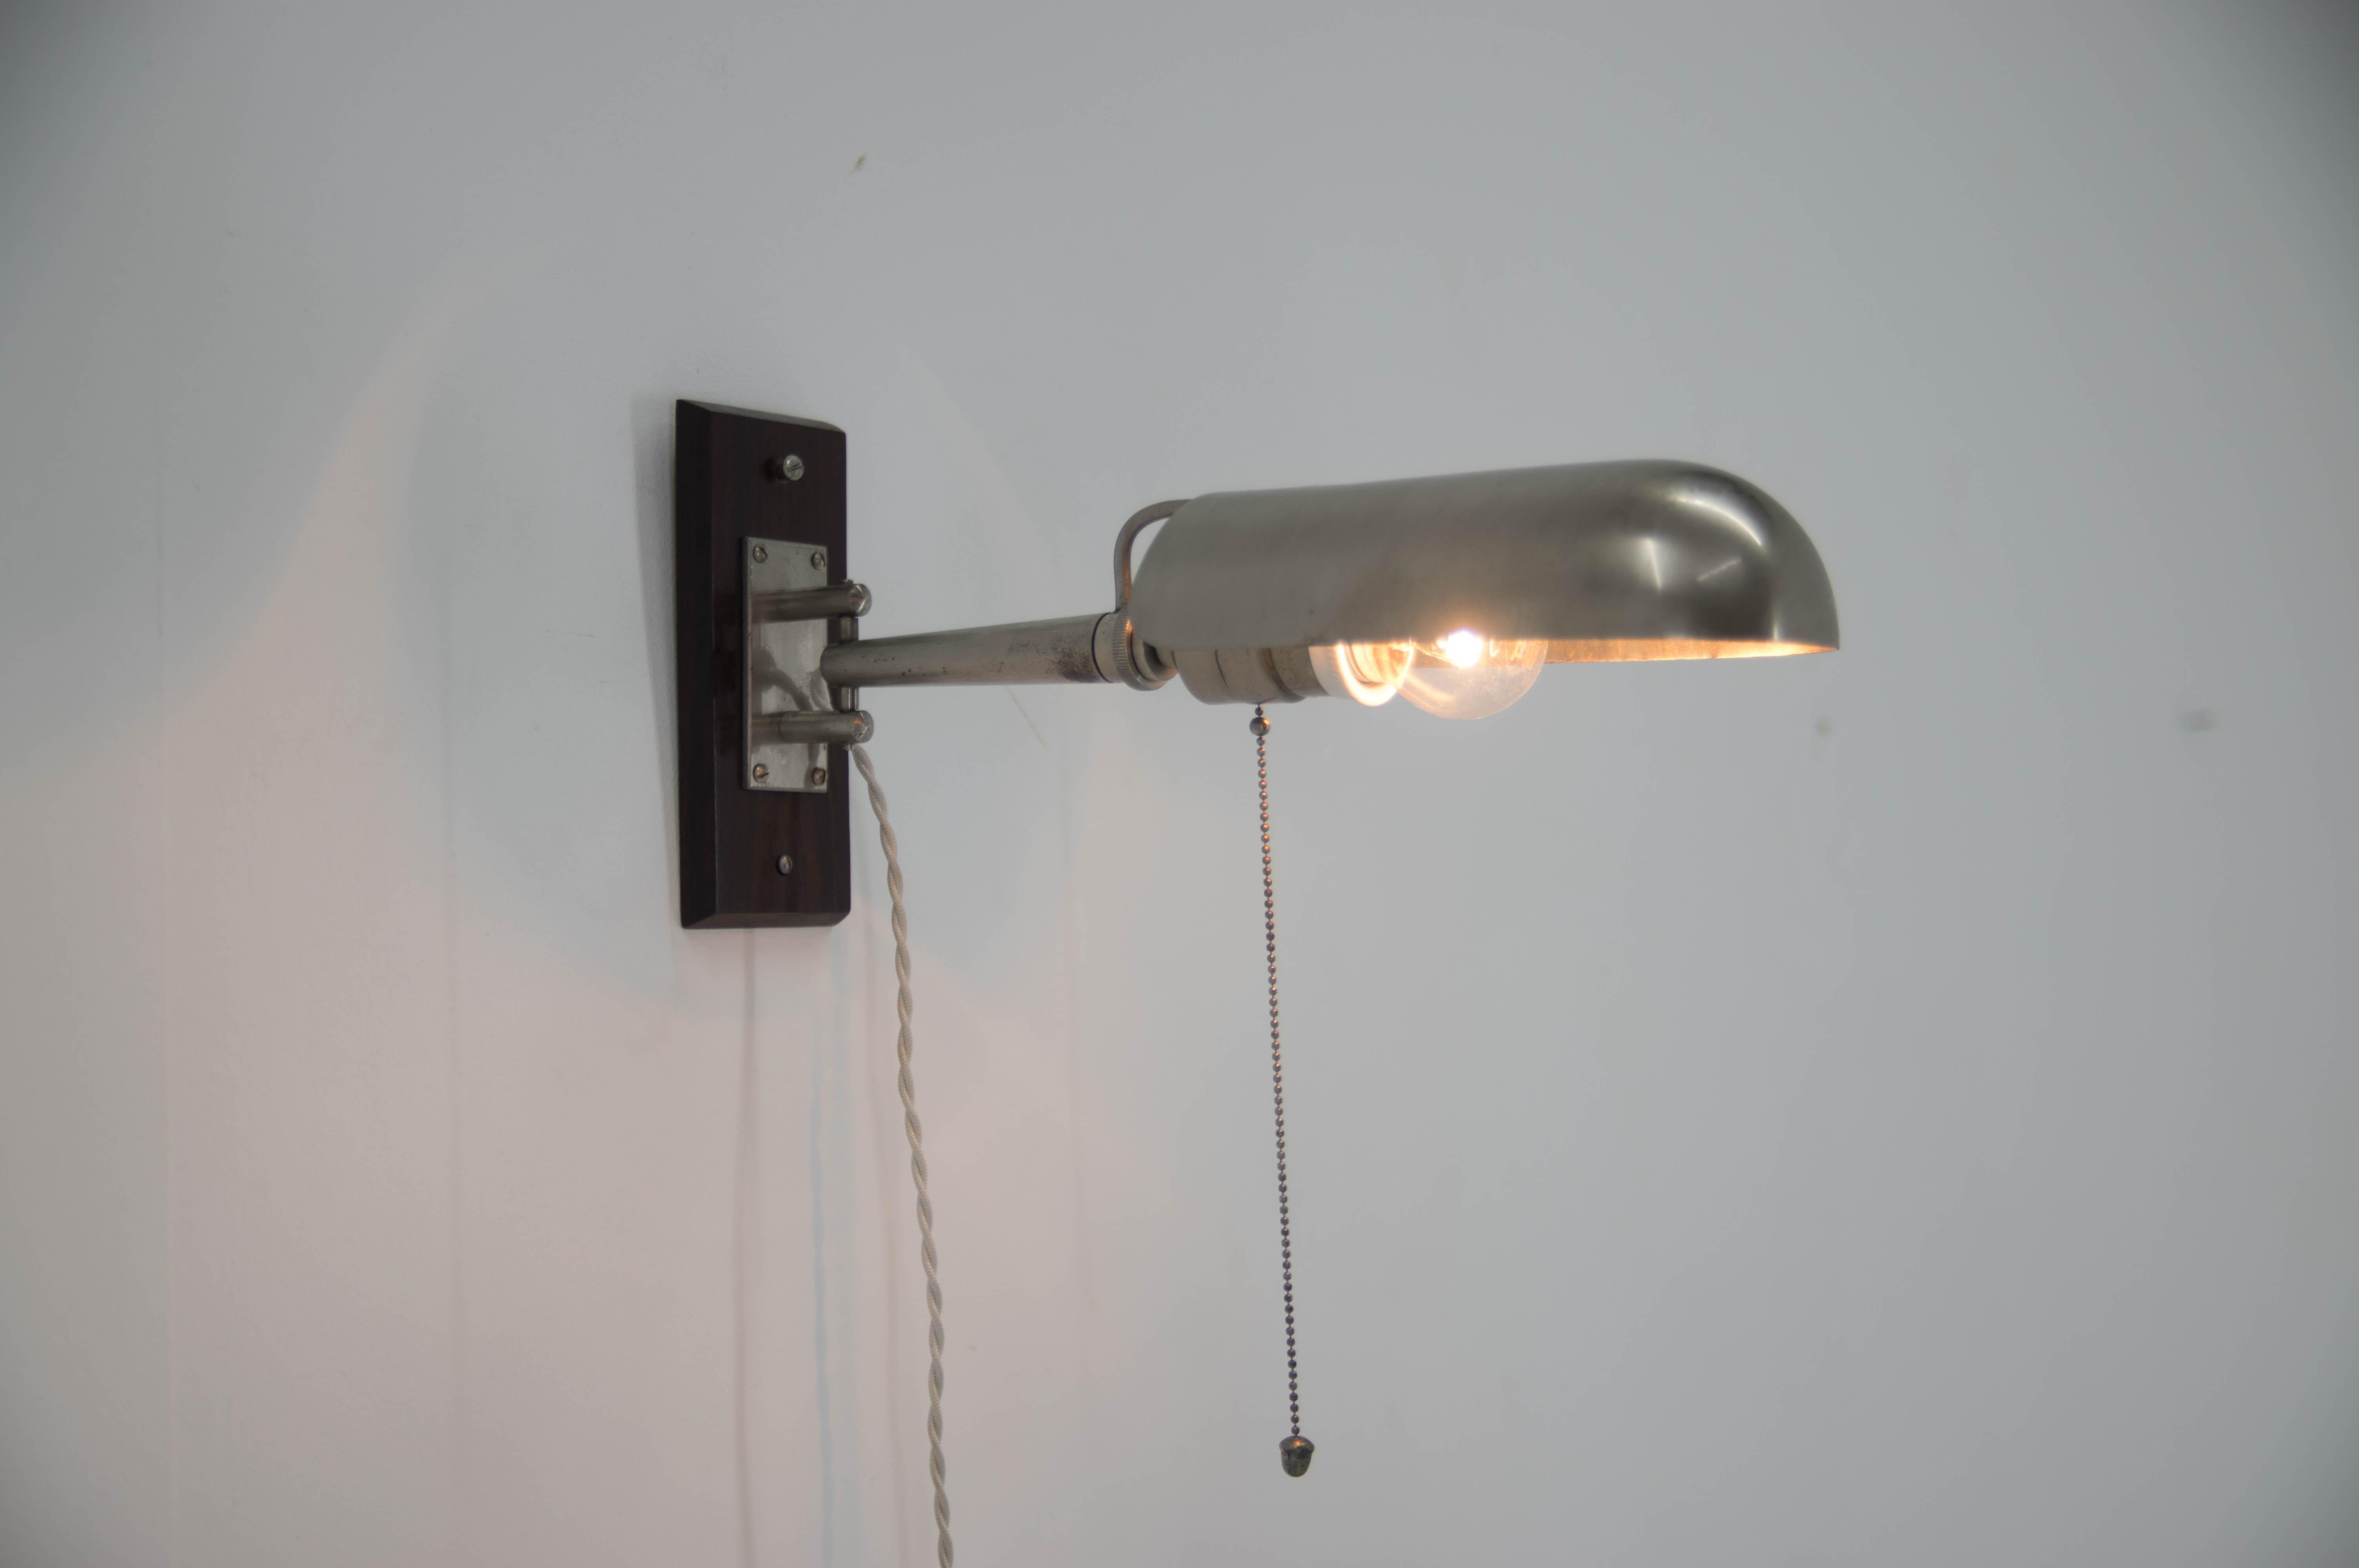 Czech Rare Functionalist Wall Lamp with Rotating Shade, 1920s For Sale